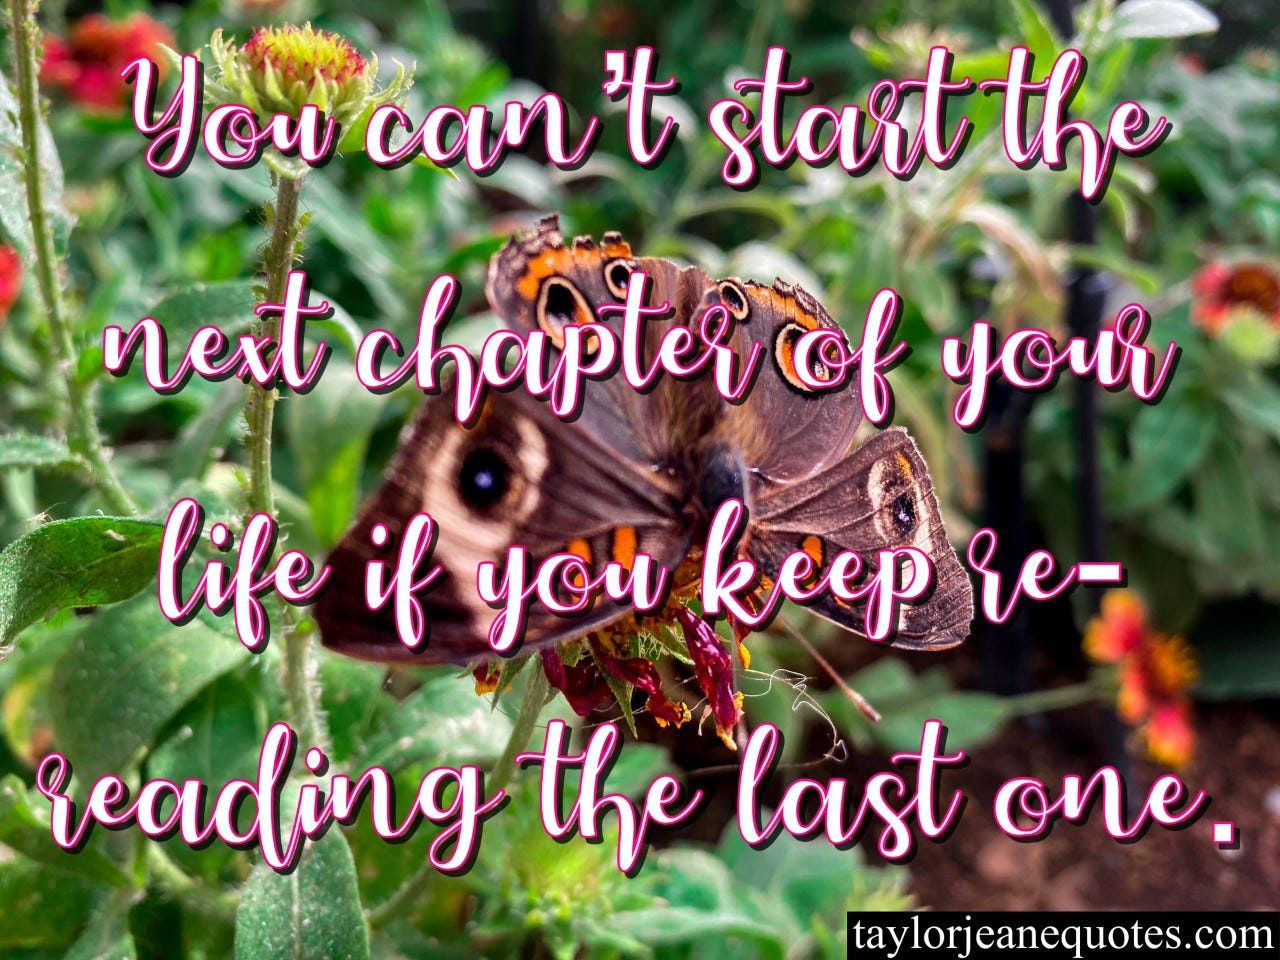 taylor jeane quotes, taylor jeane, taylor wilson, inspiring quotes, quotes for motivation, reading quotes, chapter quotes, chapters of life quotes, let go quotes, move on quotes, life quotes, growth quotes, change quotes, beginning quotes, ending quotes, butterfly, phoenix botanical gardens